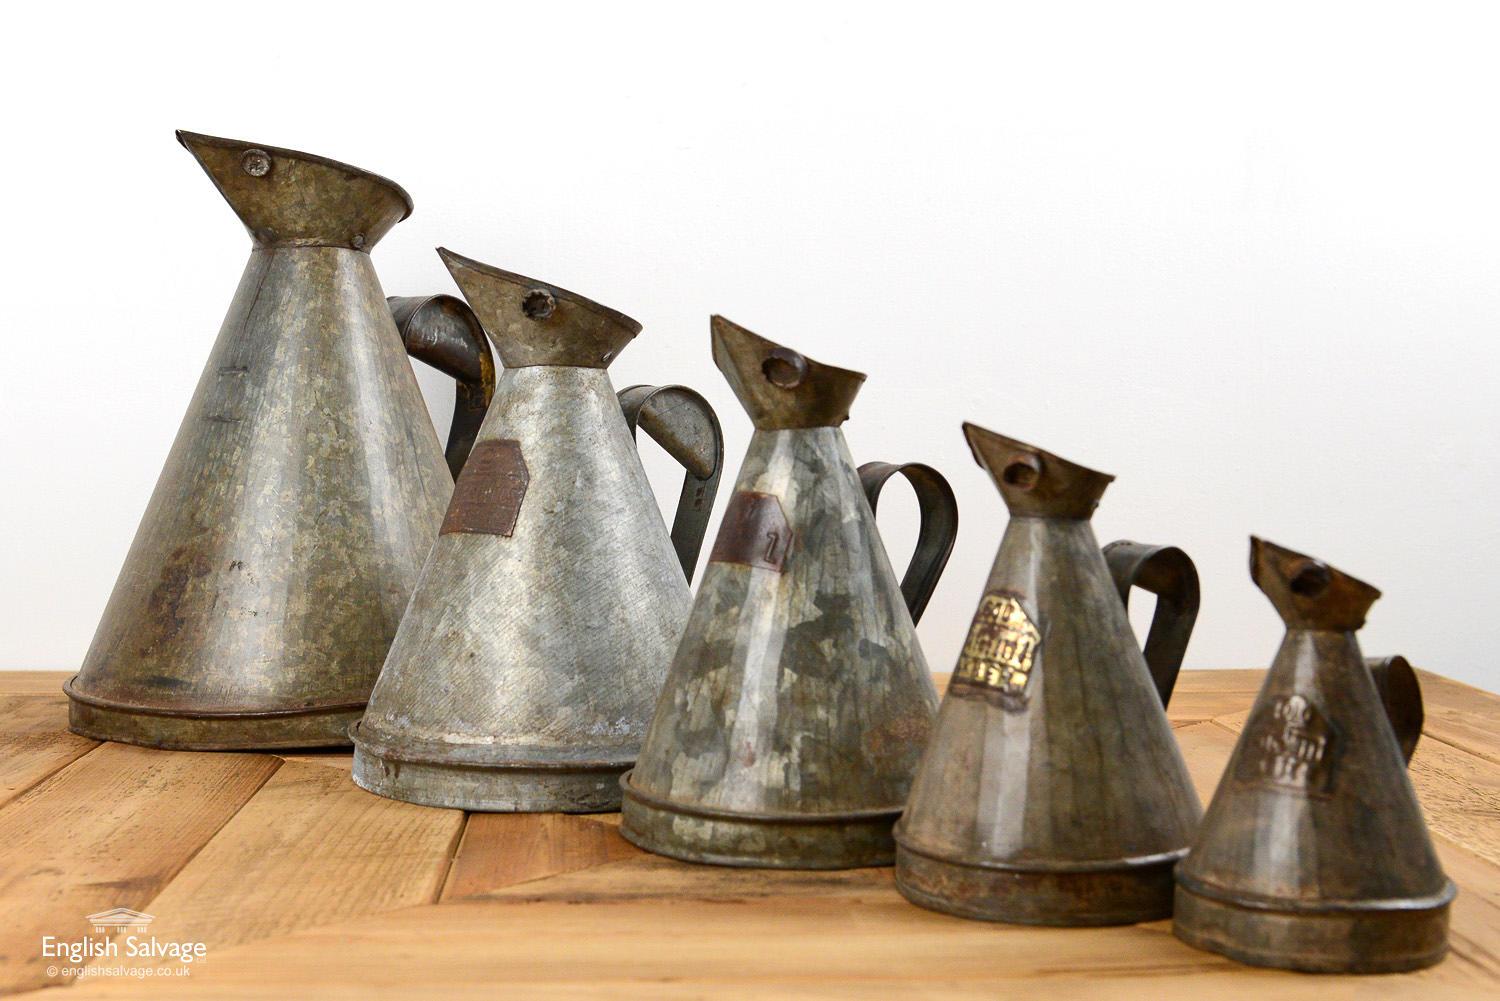 Galvanised oil jugs with handles salvaged from India. Details below. Few small dings and bumps to all.